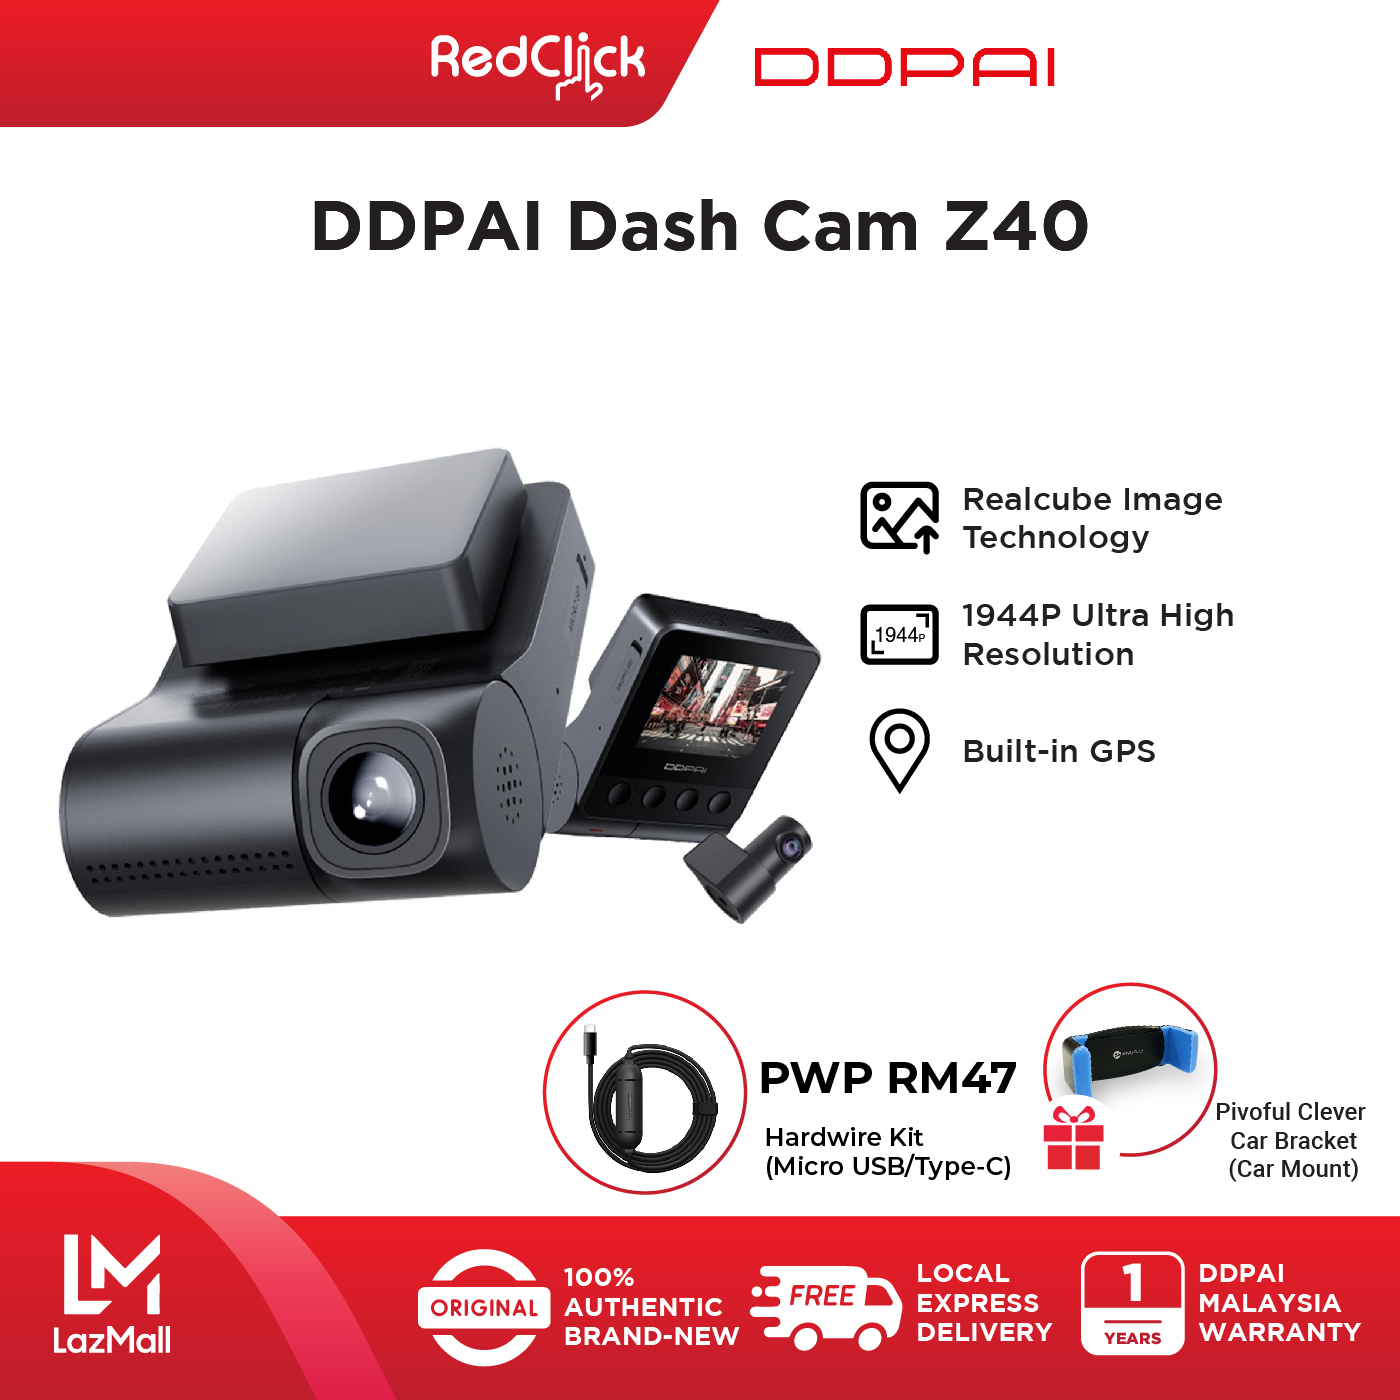 DDPAI Dash Cam Z40 Series 1944P Full HD Resolution Exquisite Design Wide Angle Monitoring Emergency Recording Works With DDPAI App + Free Gift